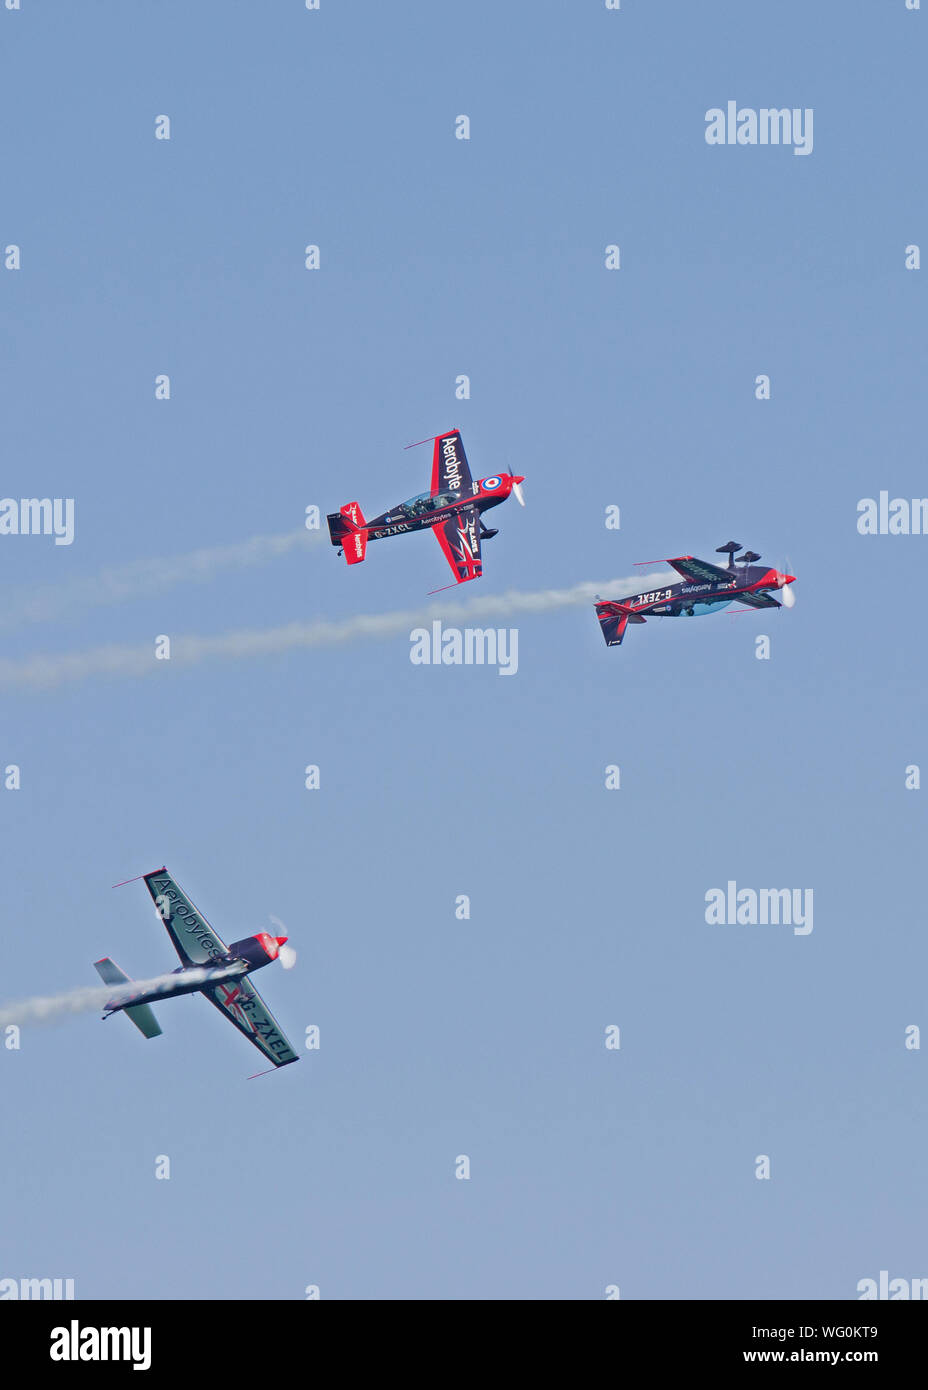 Three of the Blades Aerobatics Team perform this amazing stunt for the crowds at Eastbourne's International Airshow in August 2018. Stock Photo